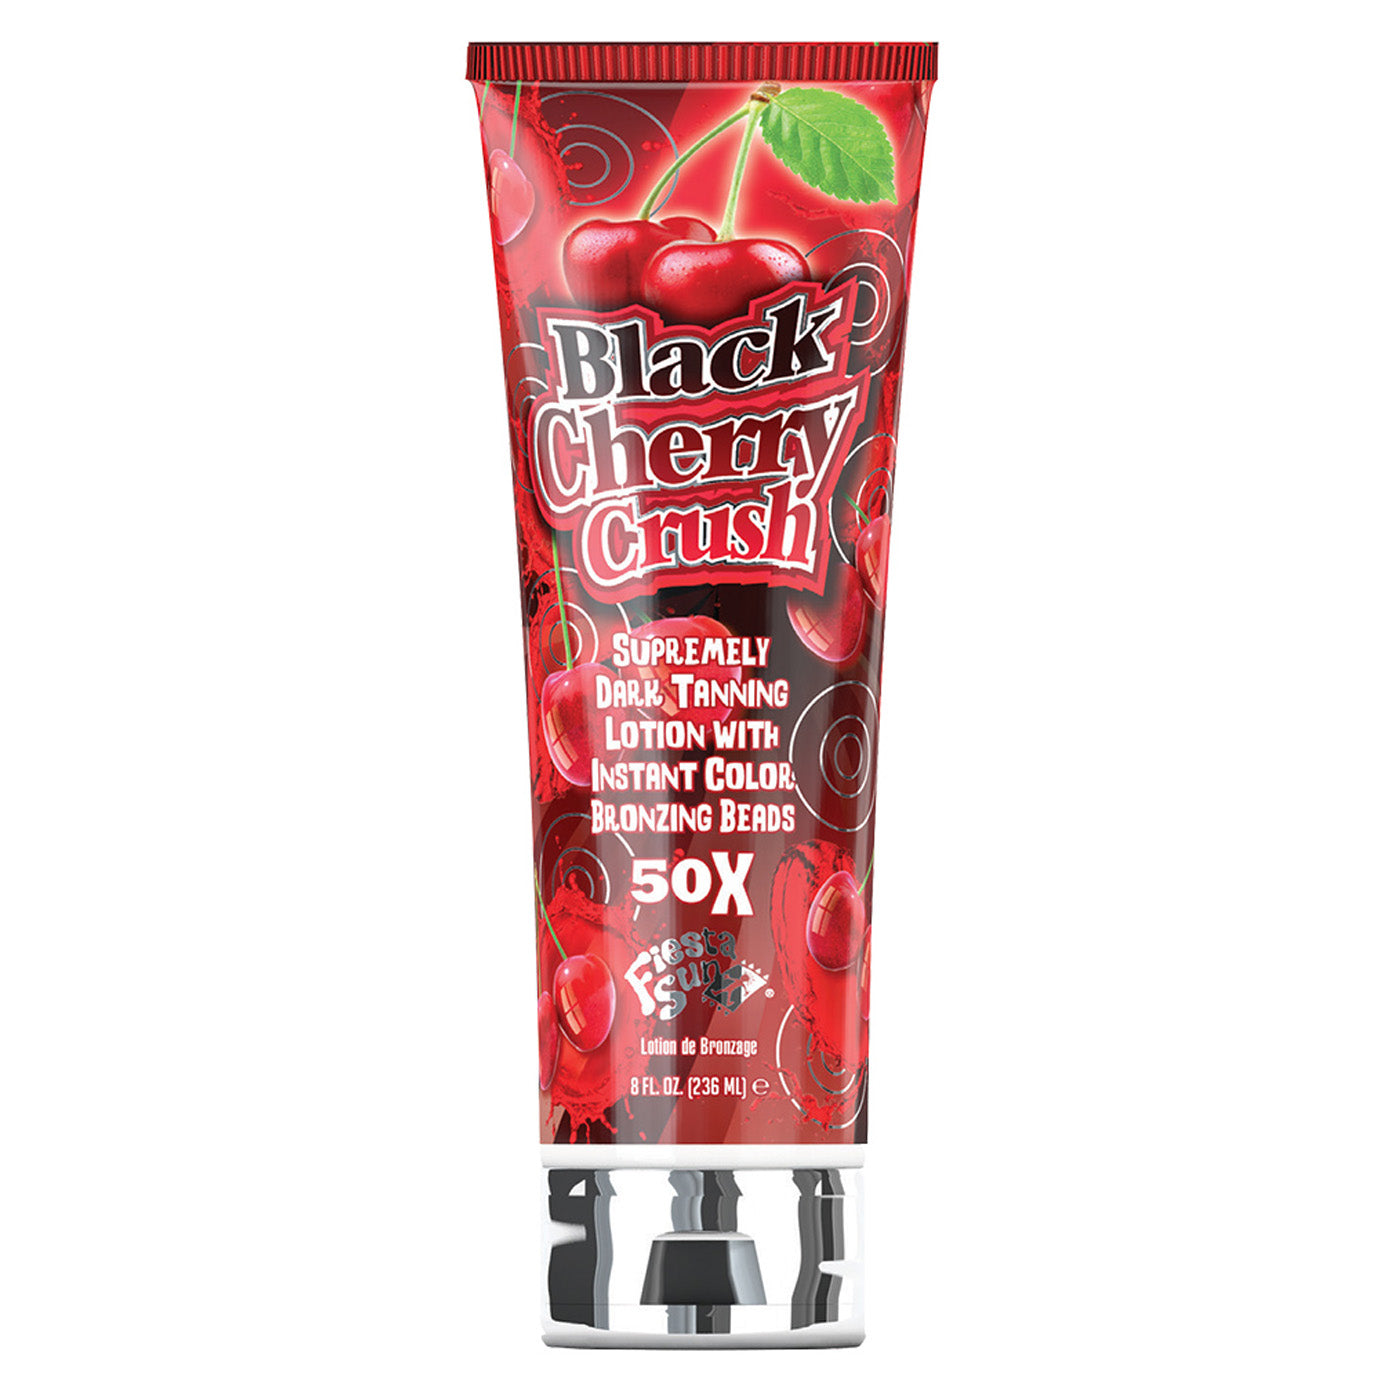 Fiesta Sun Black Cherry Crush Tanning Lotion - Ultimate Hair and Beauty